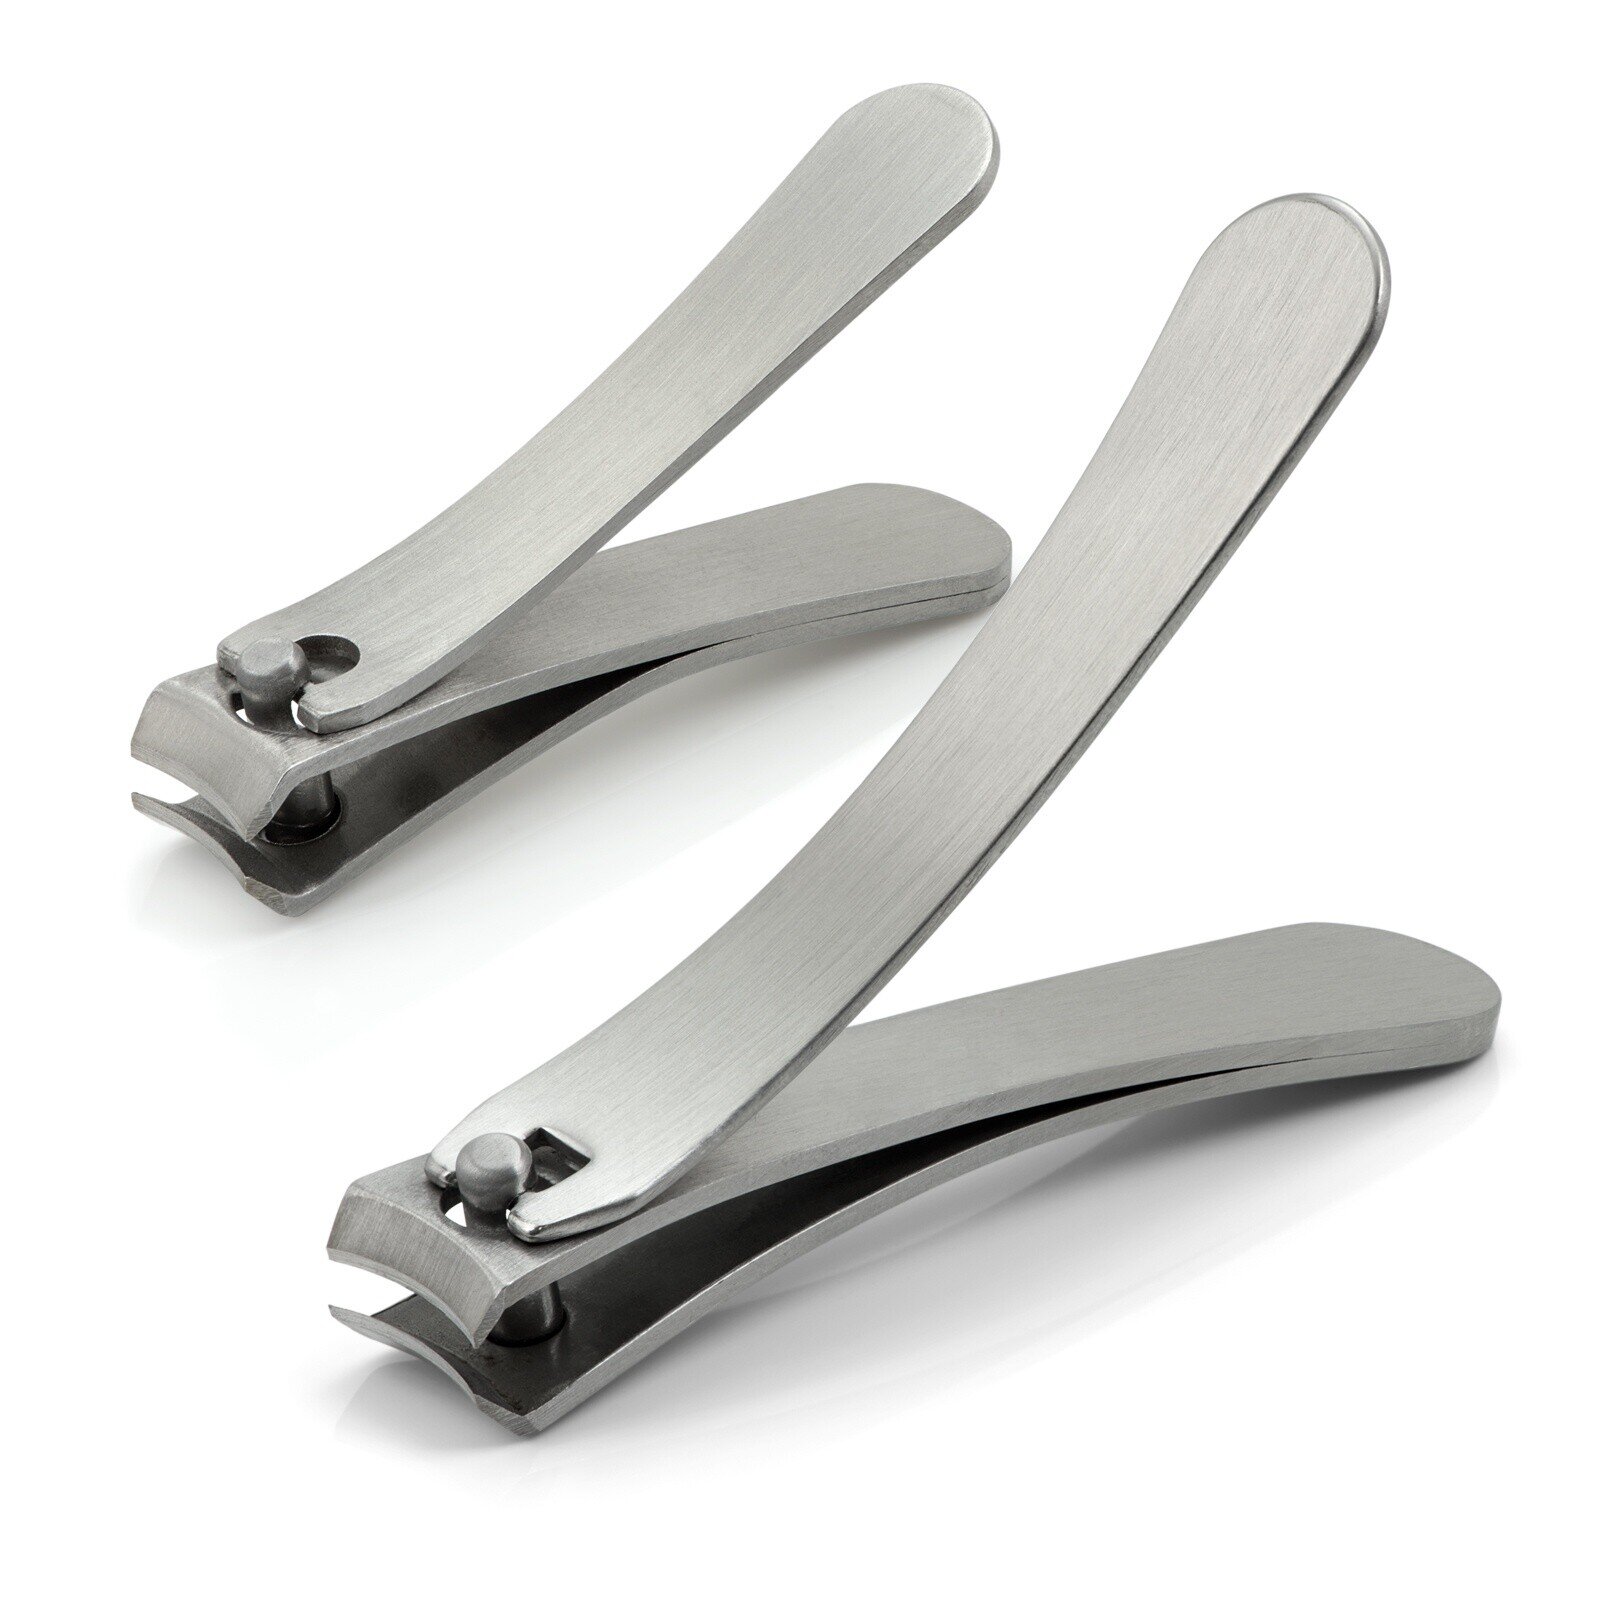 Otto Herder Set of 2 Bent Nail Clippers, Stainless Steel, made in ...